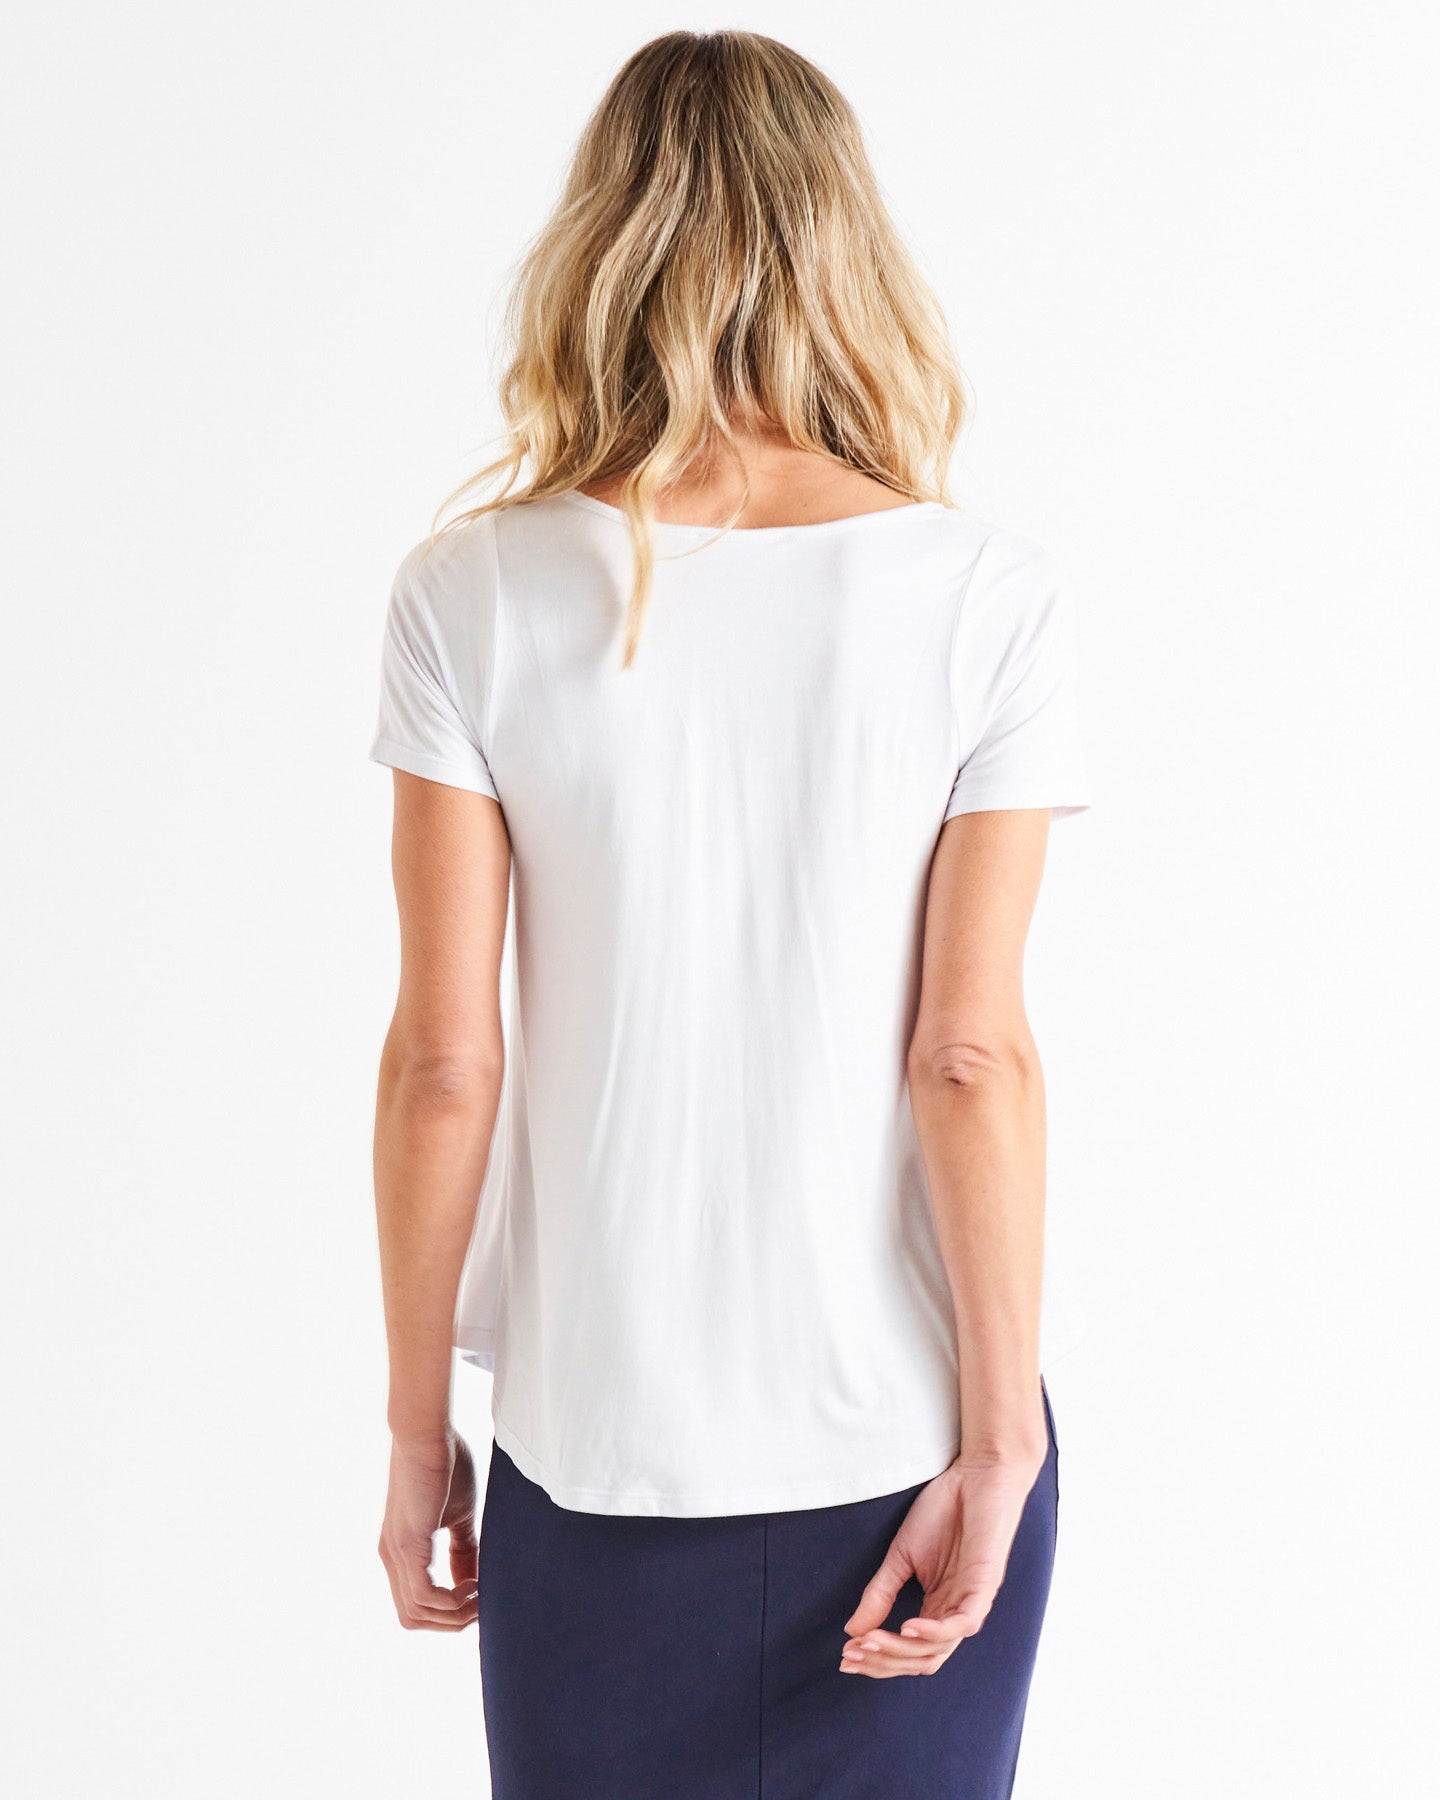 Holland Stretchy Scoop Neck Basic Tee - White